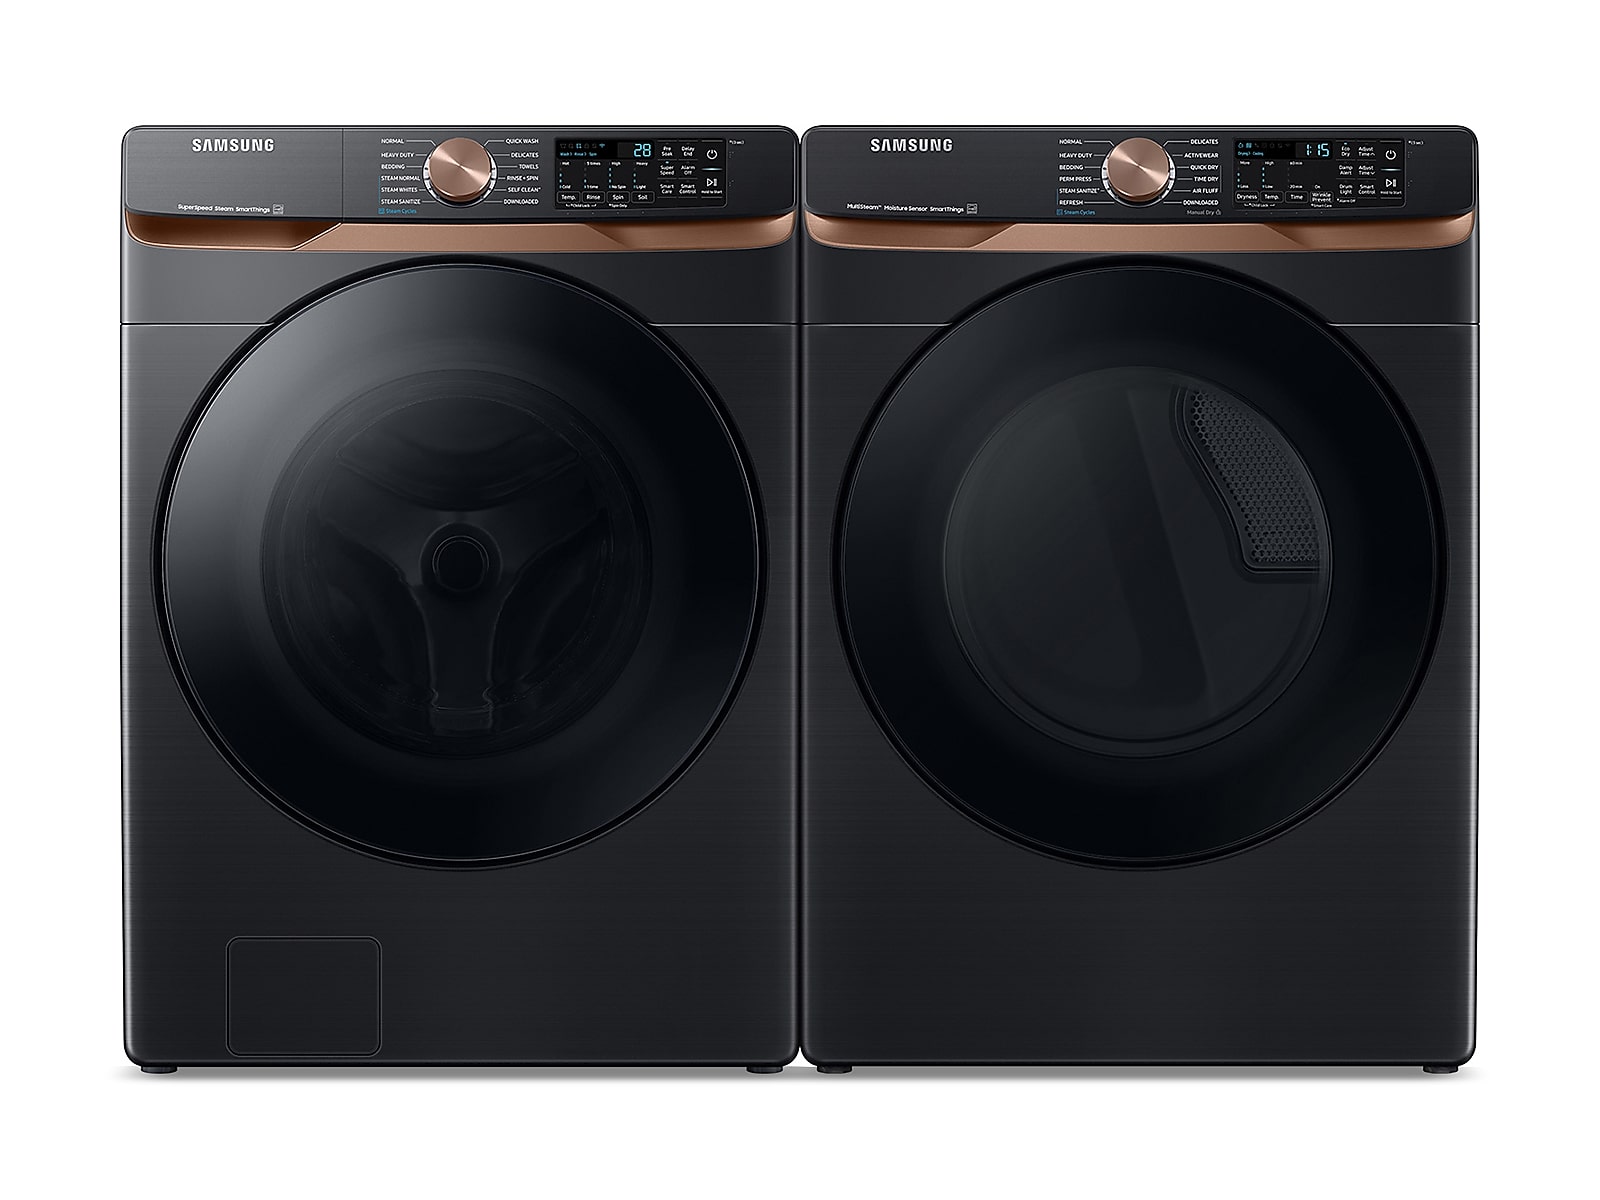 Samsung Extra Large Capacity Smart Front Load Washer with Super Speed Wash and Smart Electric Dryer with Steam Sanitize+ and Sensor Dry in Brushed in Black